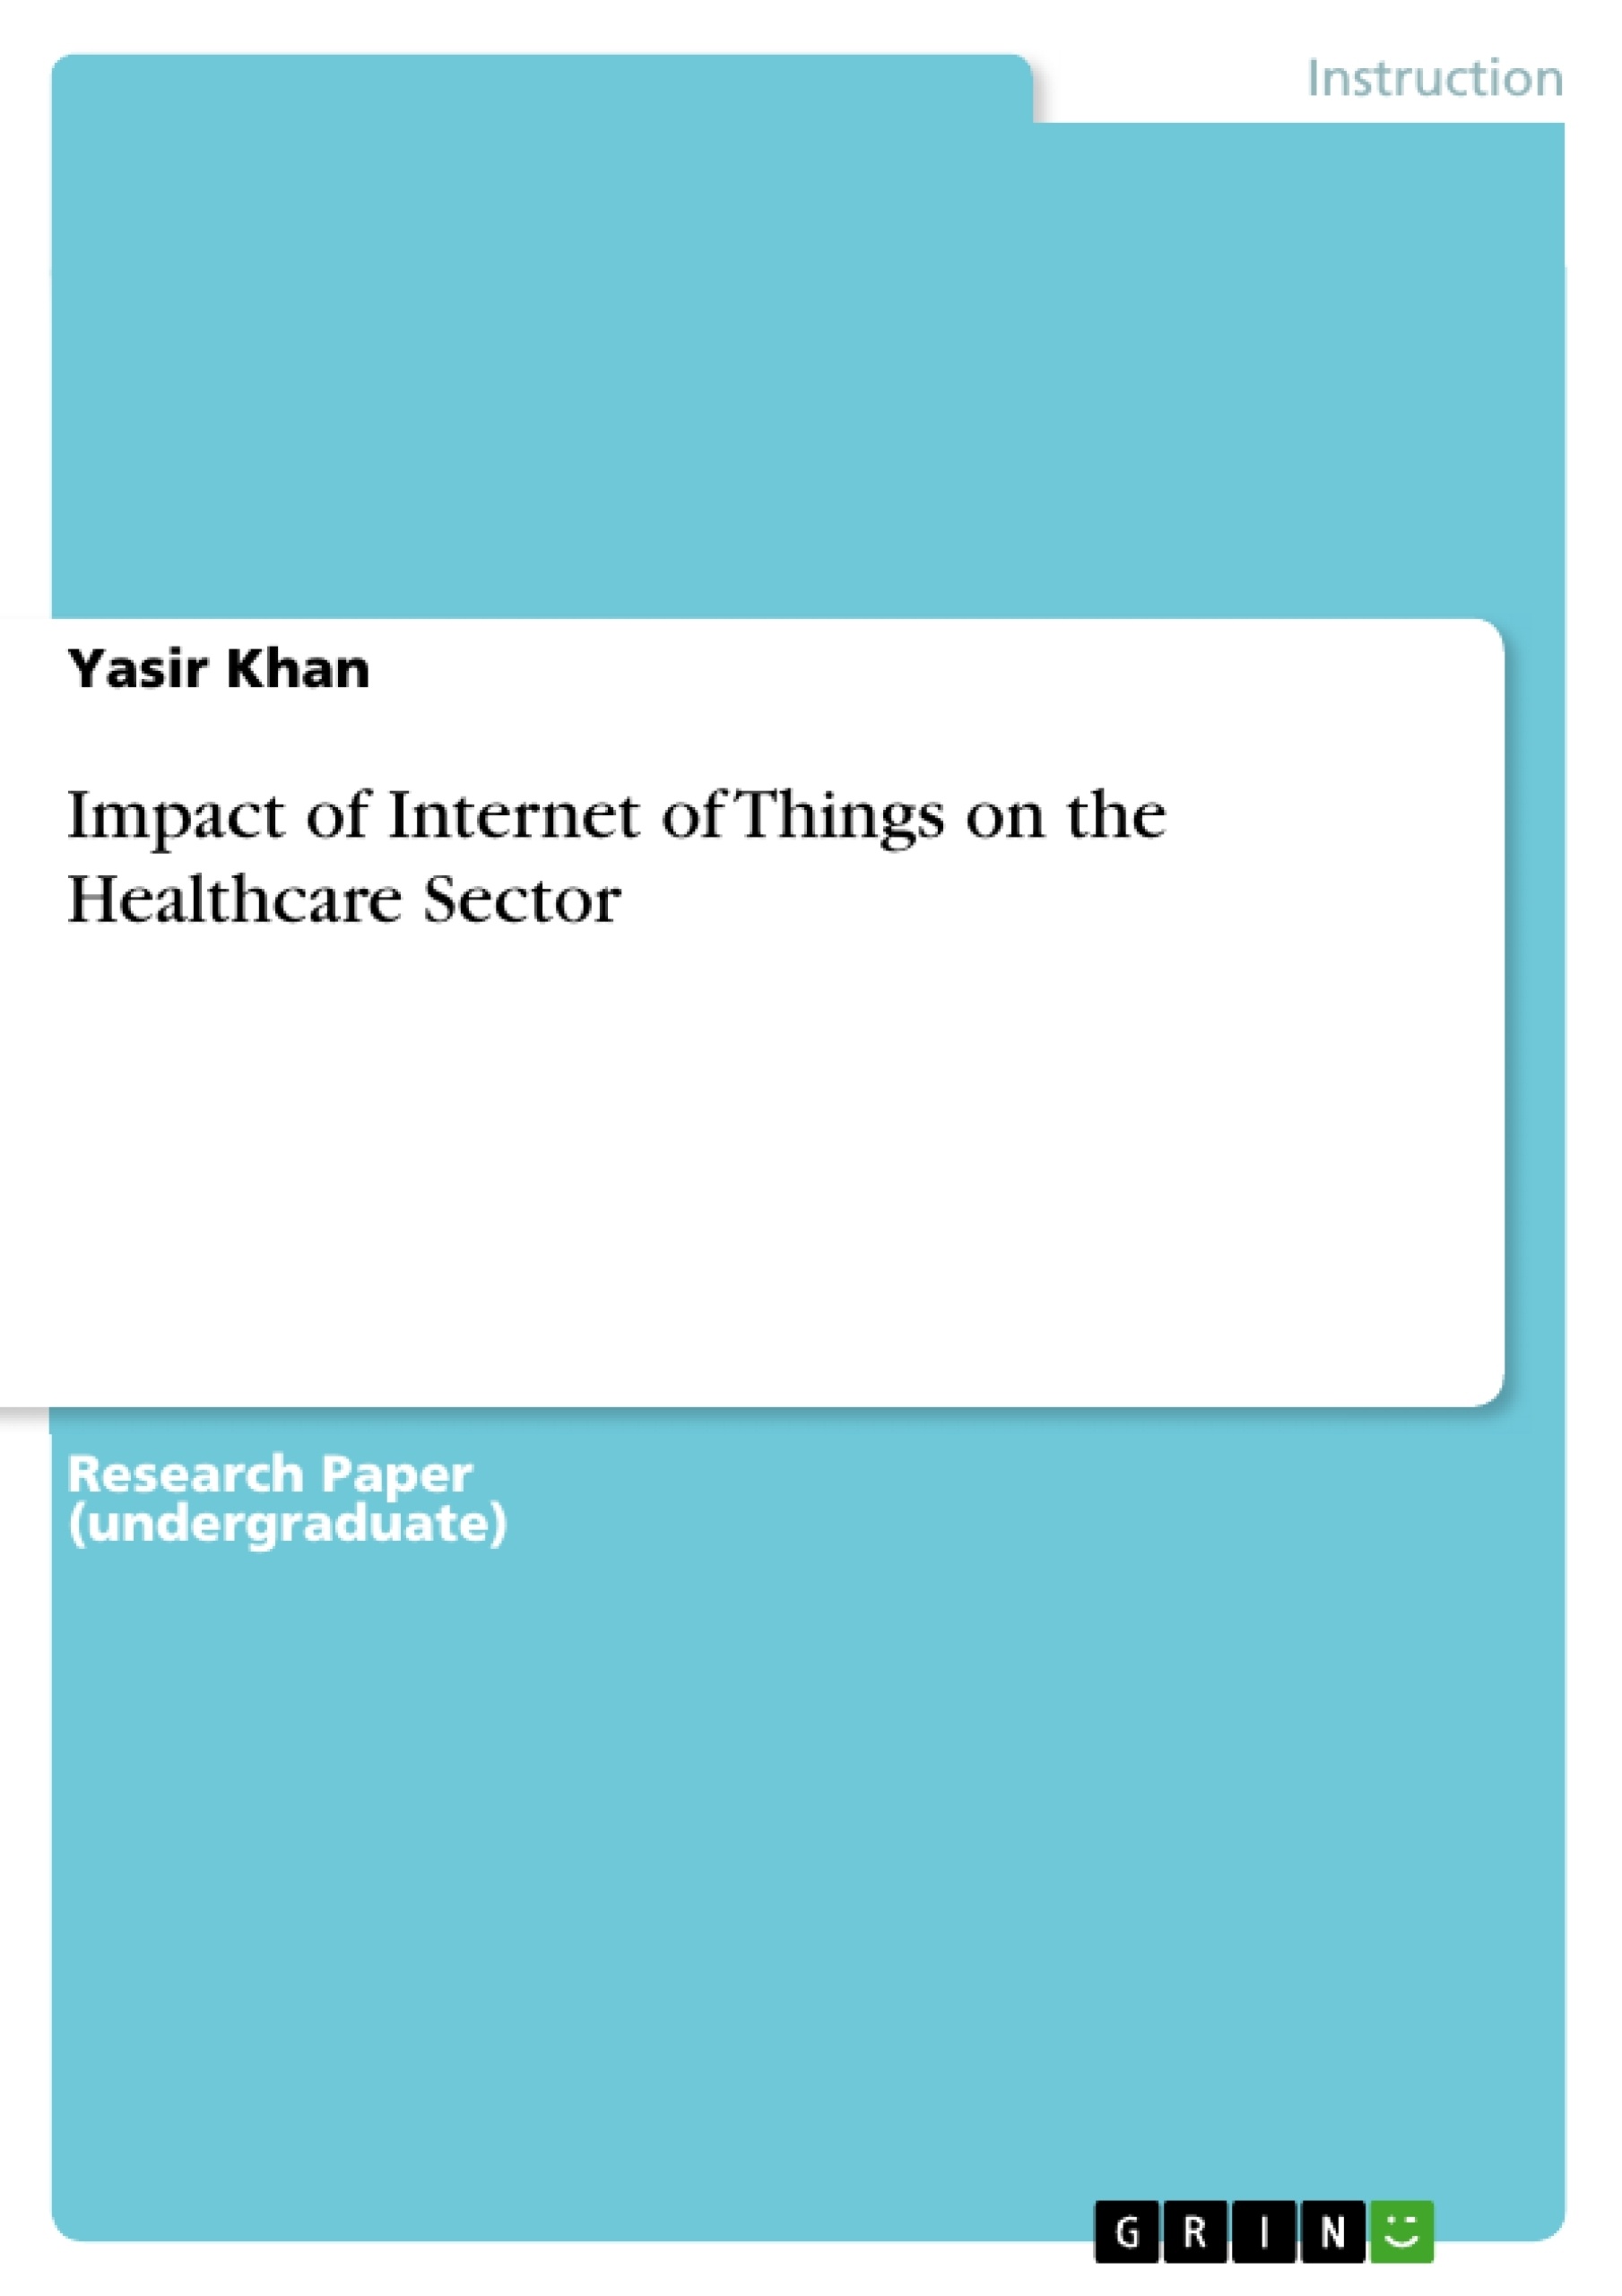 Title: Impact of Internet of Things on the Healthcare Sector